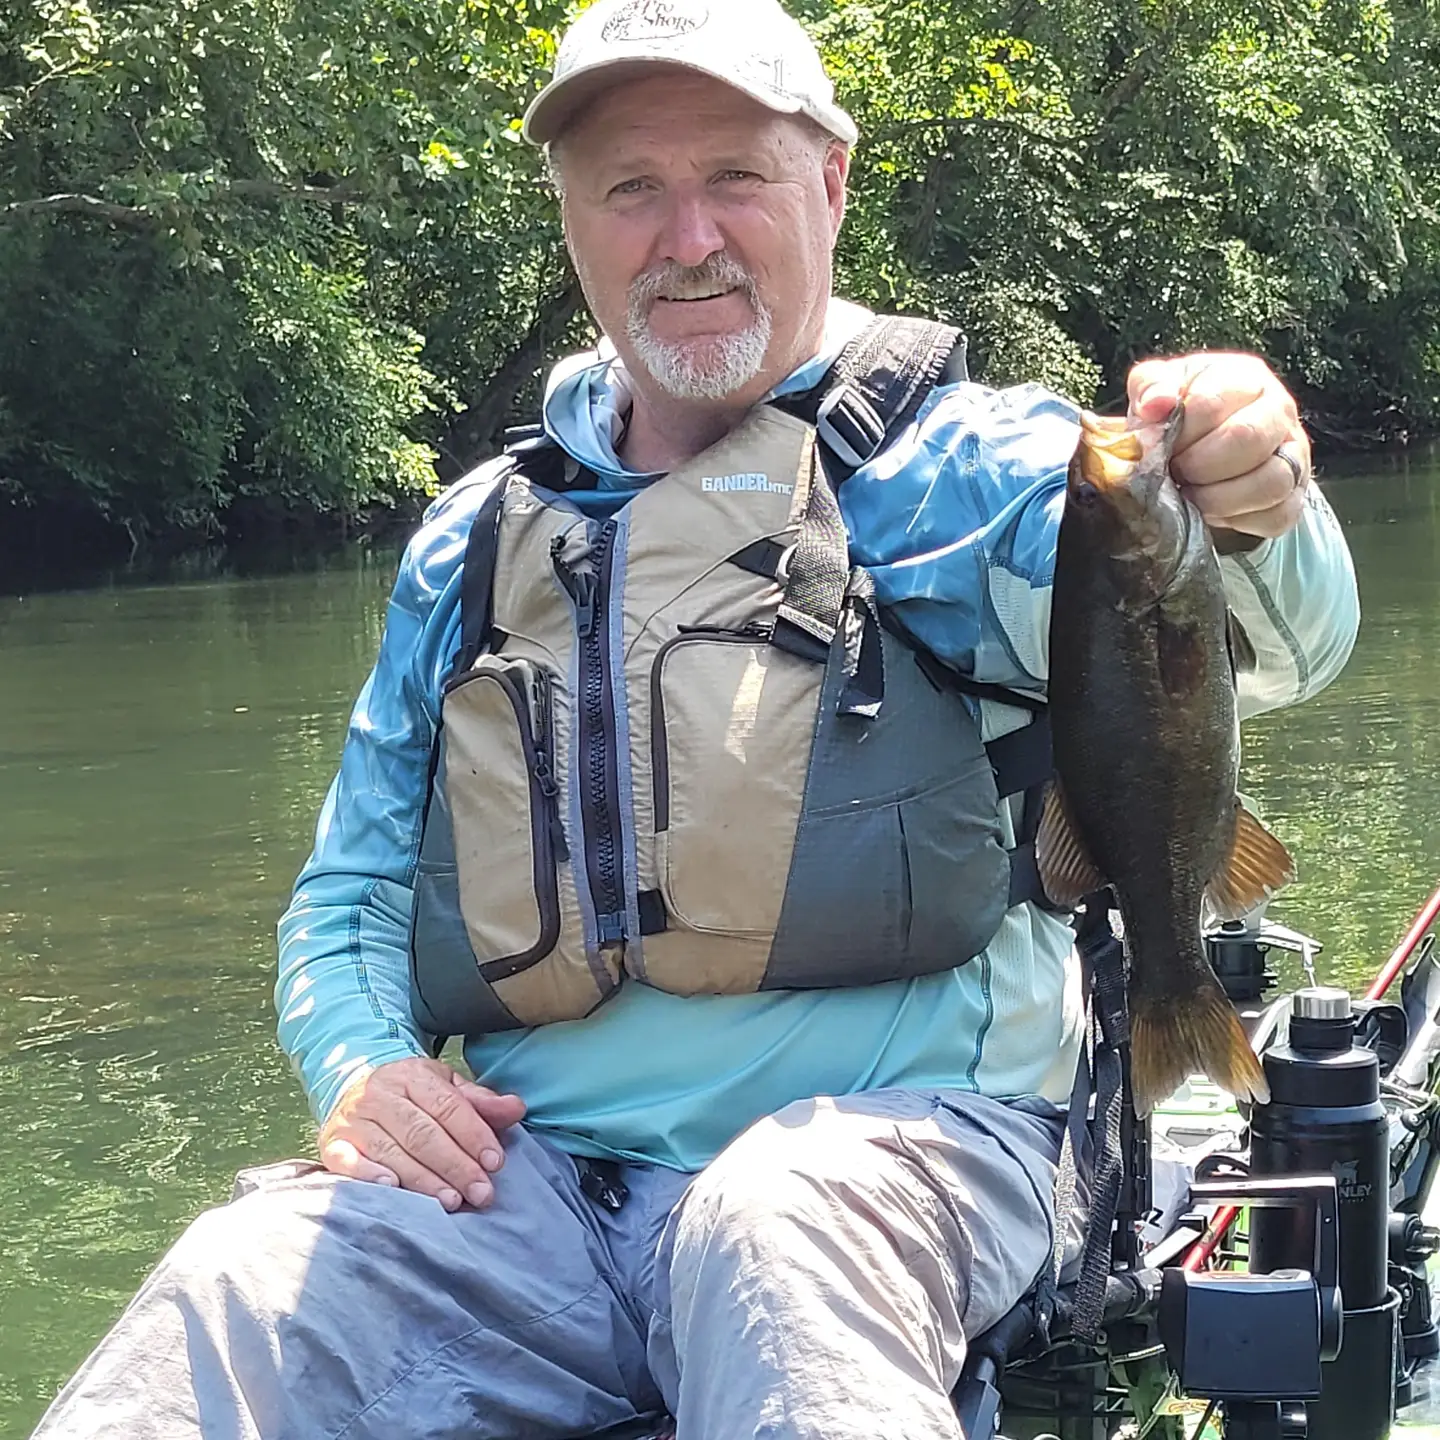 Kayak Fishing Lessons on the Schuylkill River with Top Water Trips